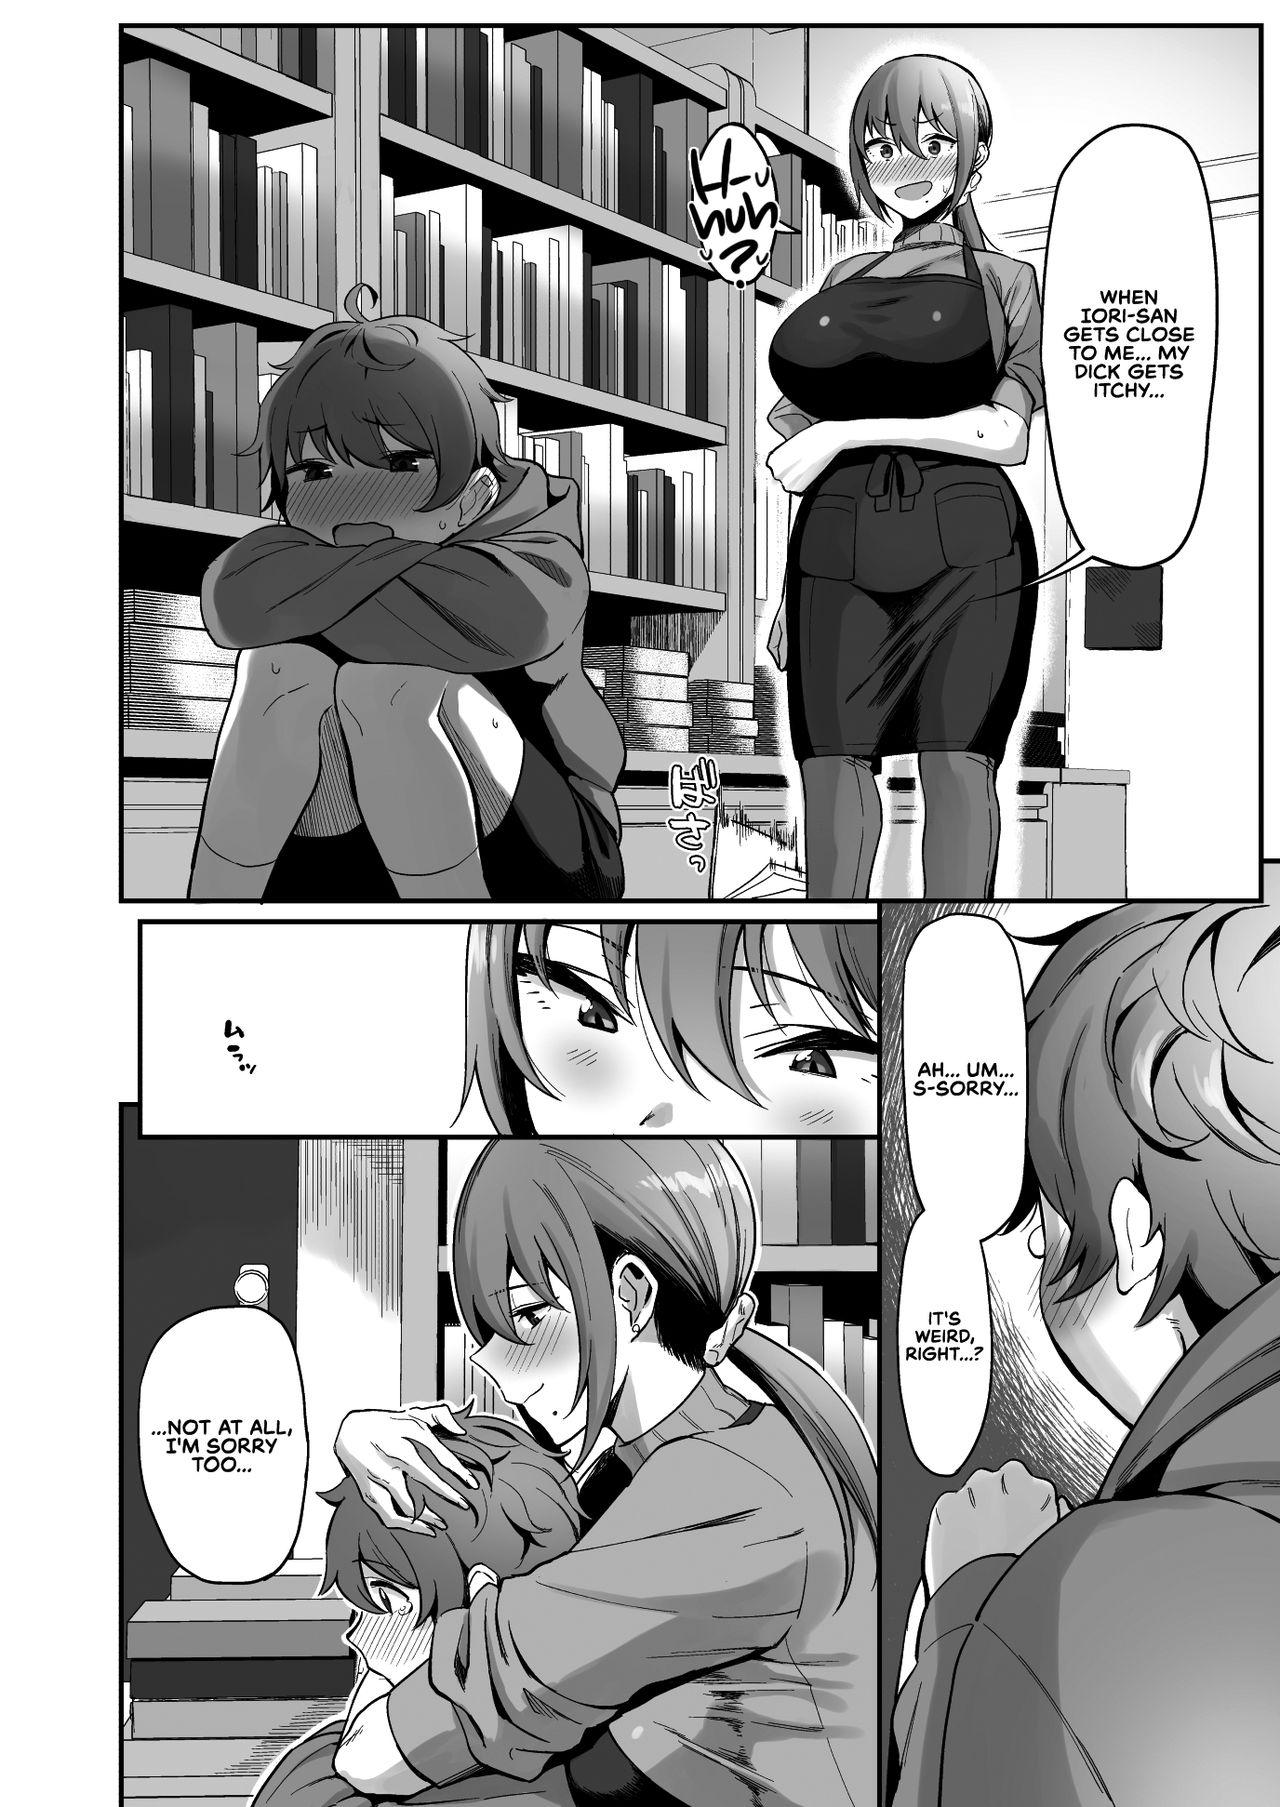 Cameltoe Furuhonya no Onee-san to | With The Lady From The Used Book Shop - Original Spank - Page 9